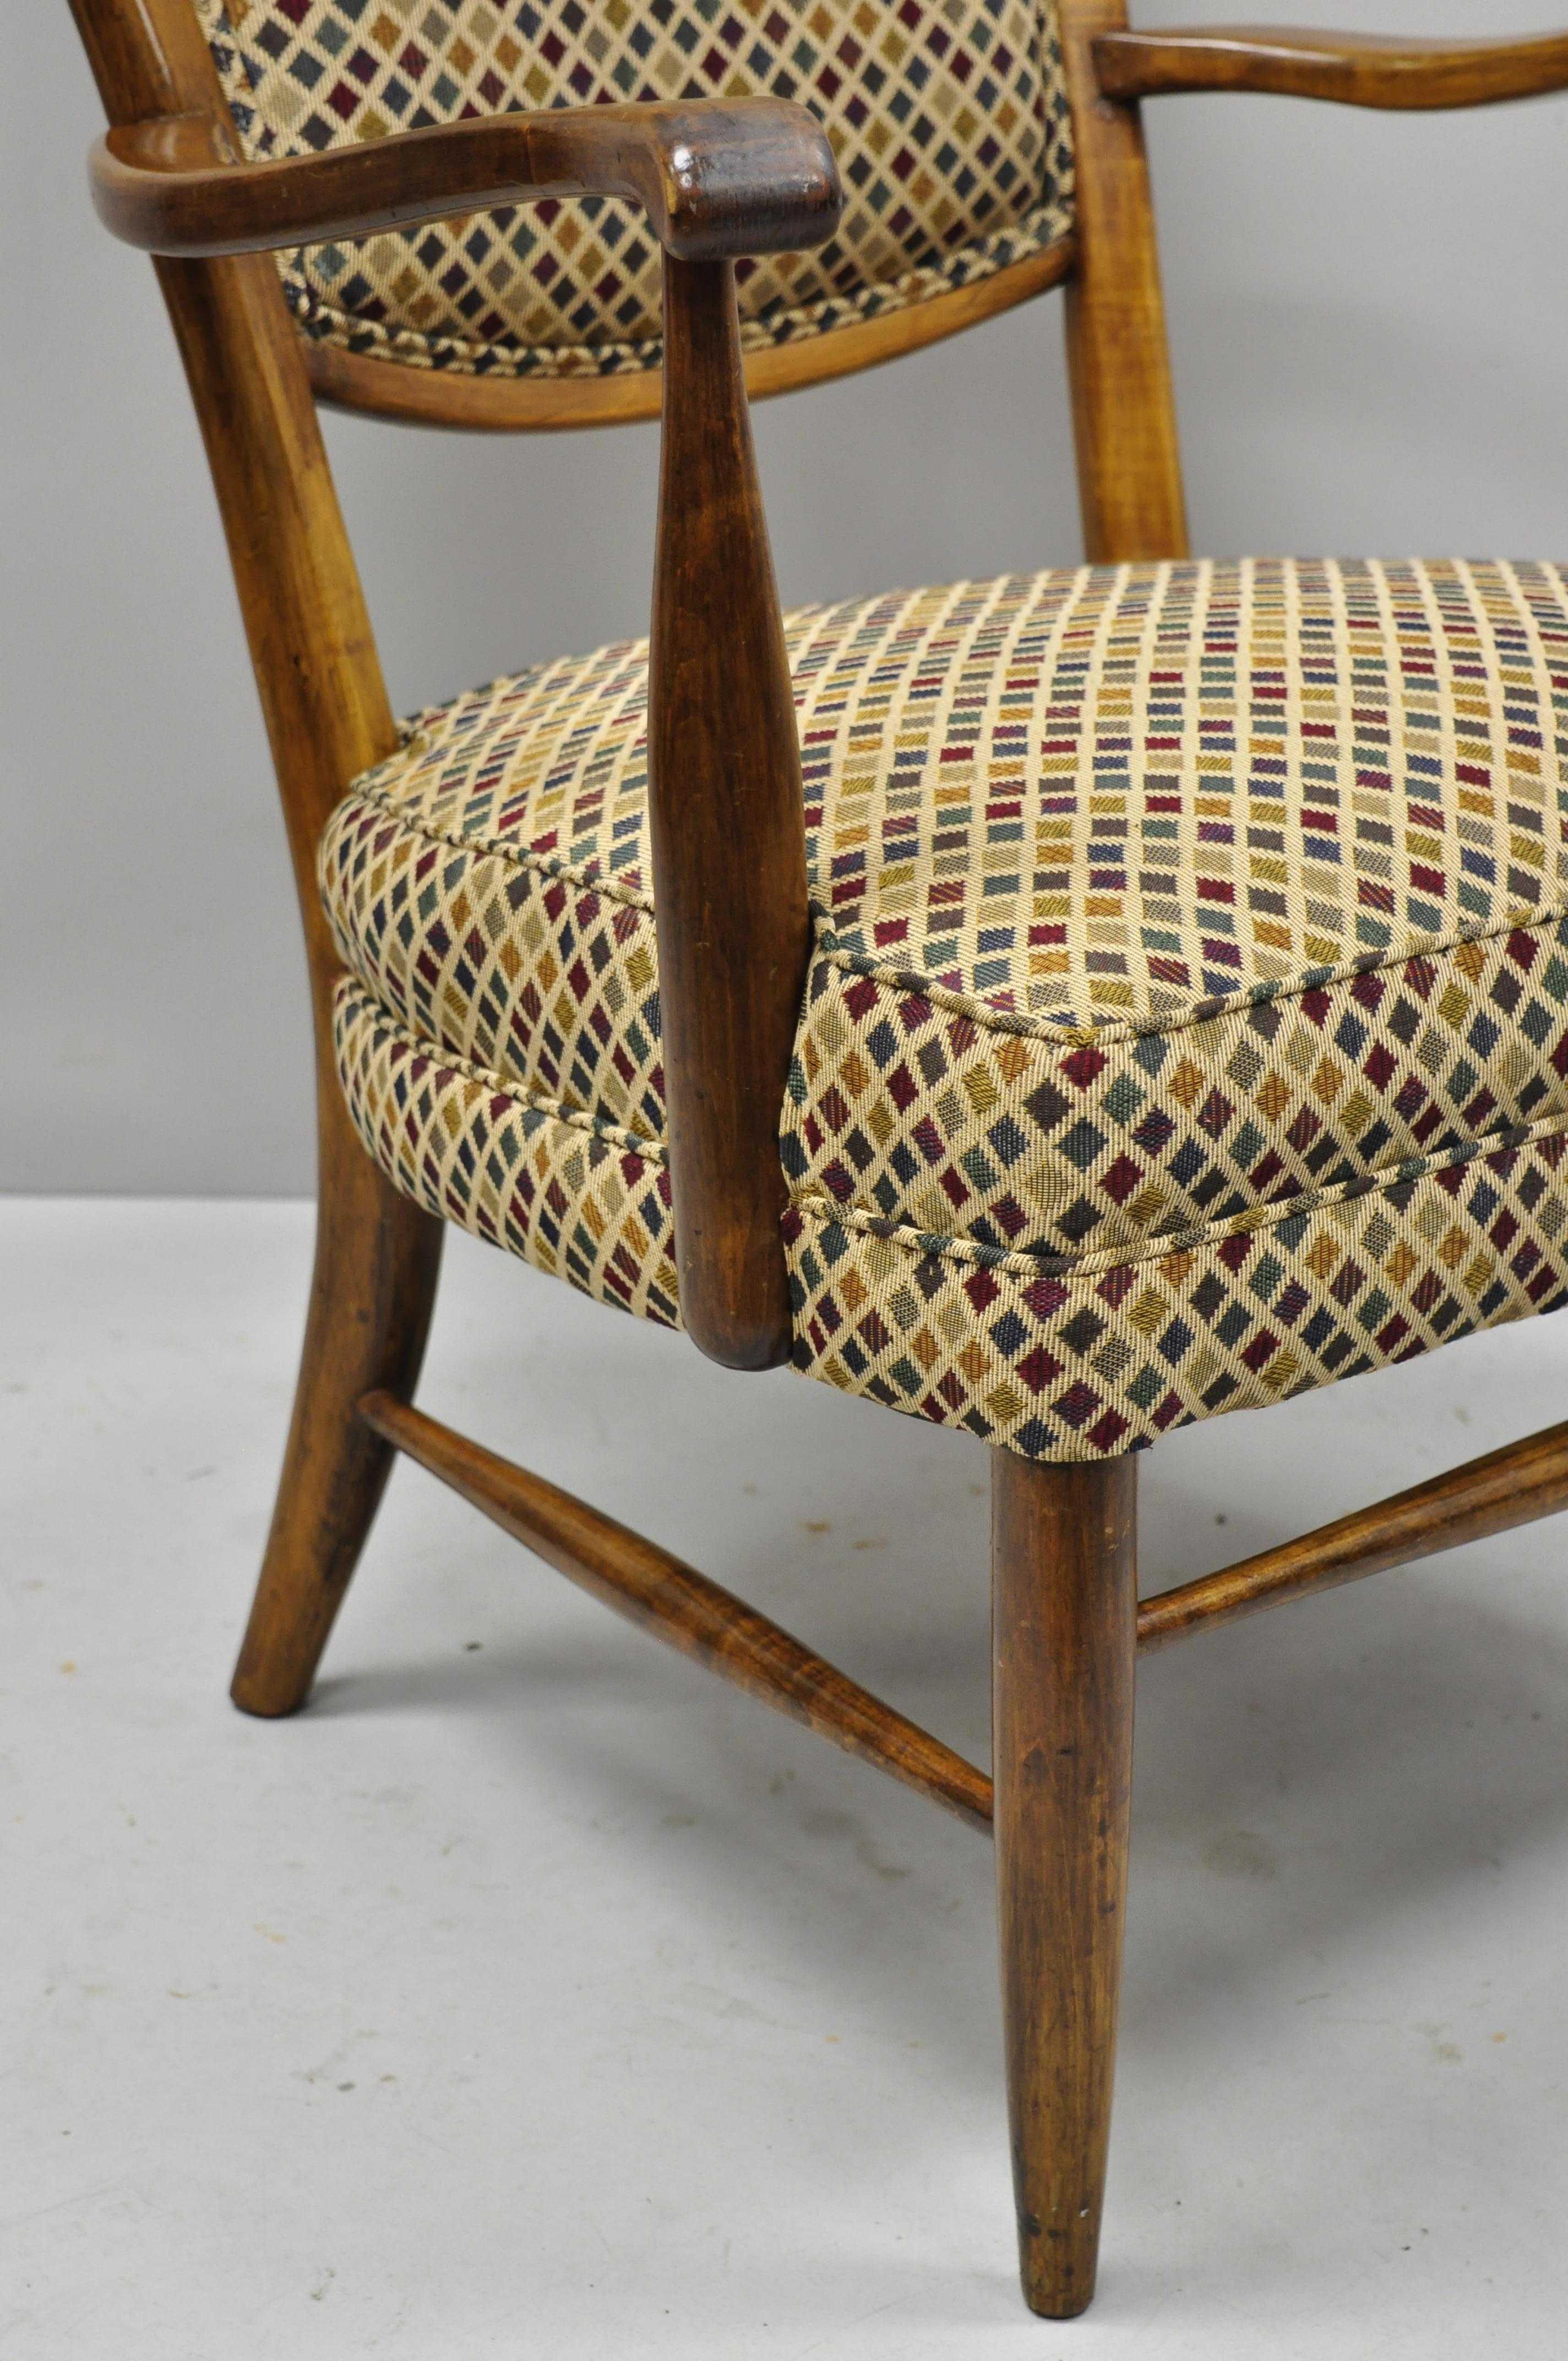 Vintage Mid-Century Modern High Back Maple Armchair Attribute to Edward Wormley For Sale 3